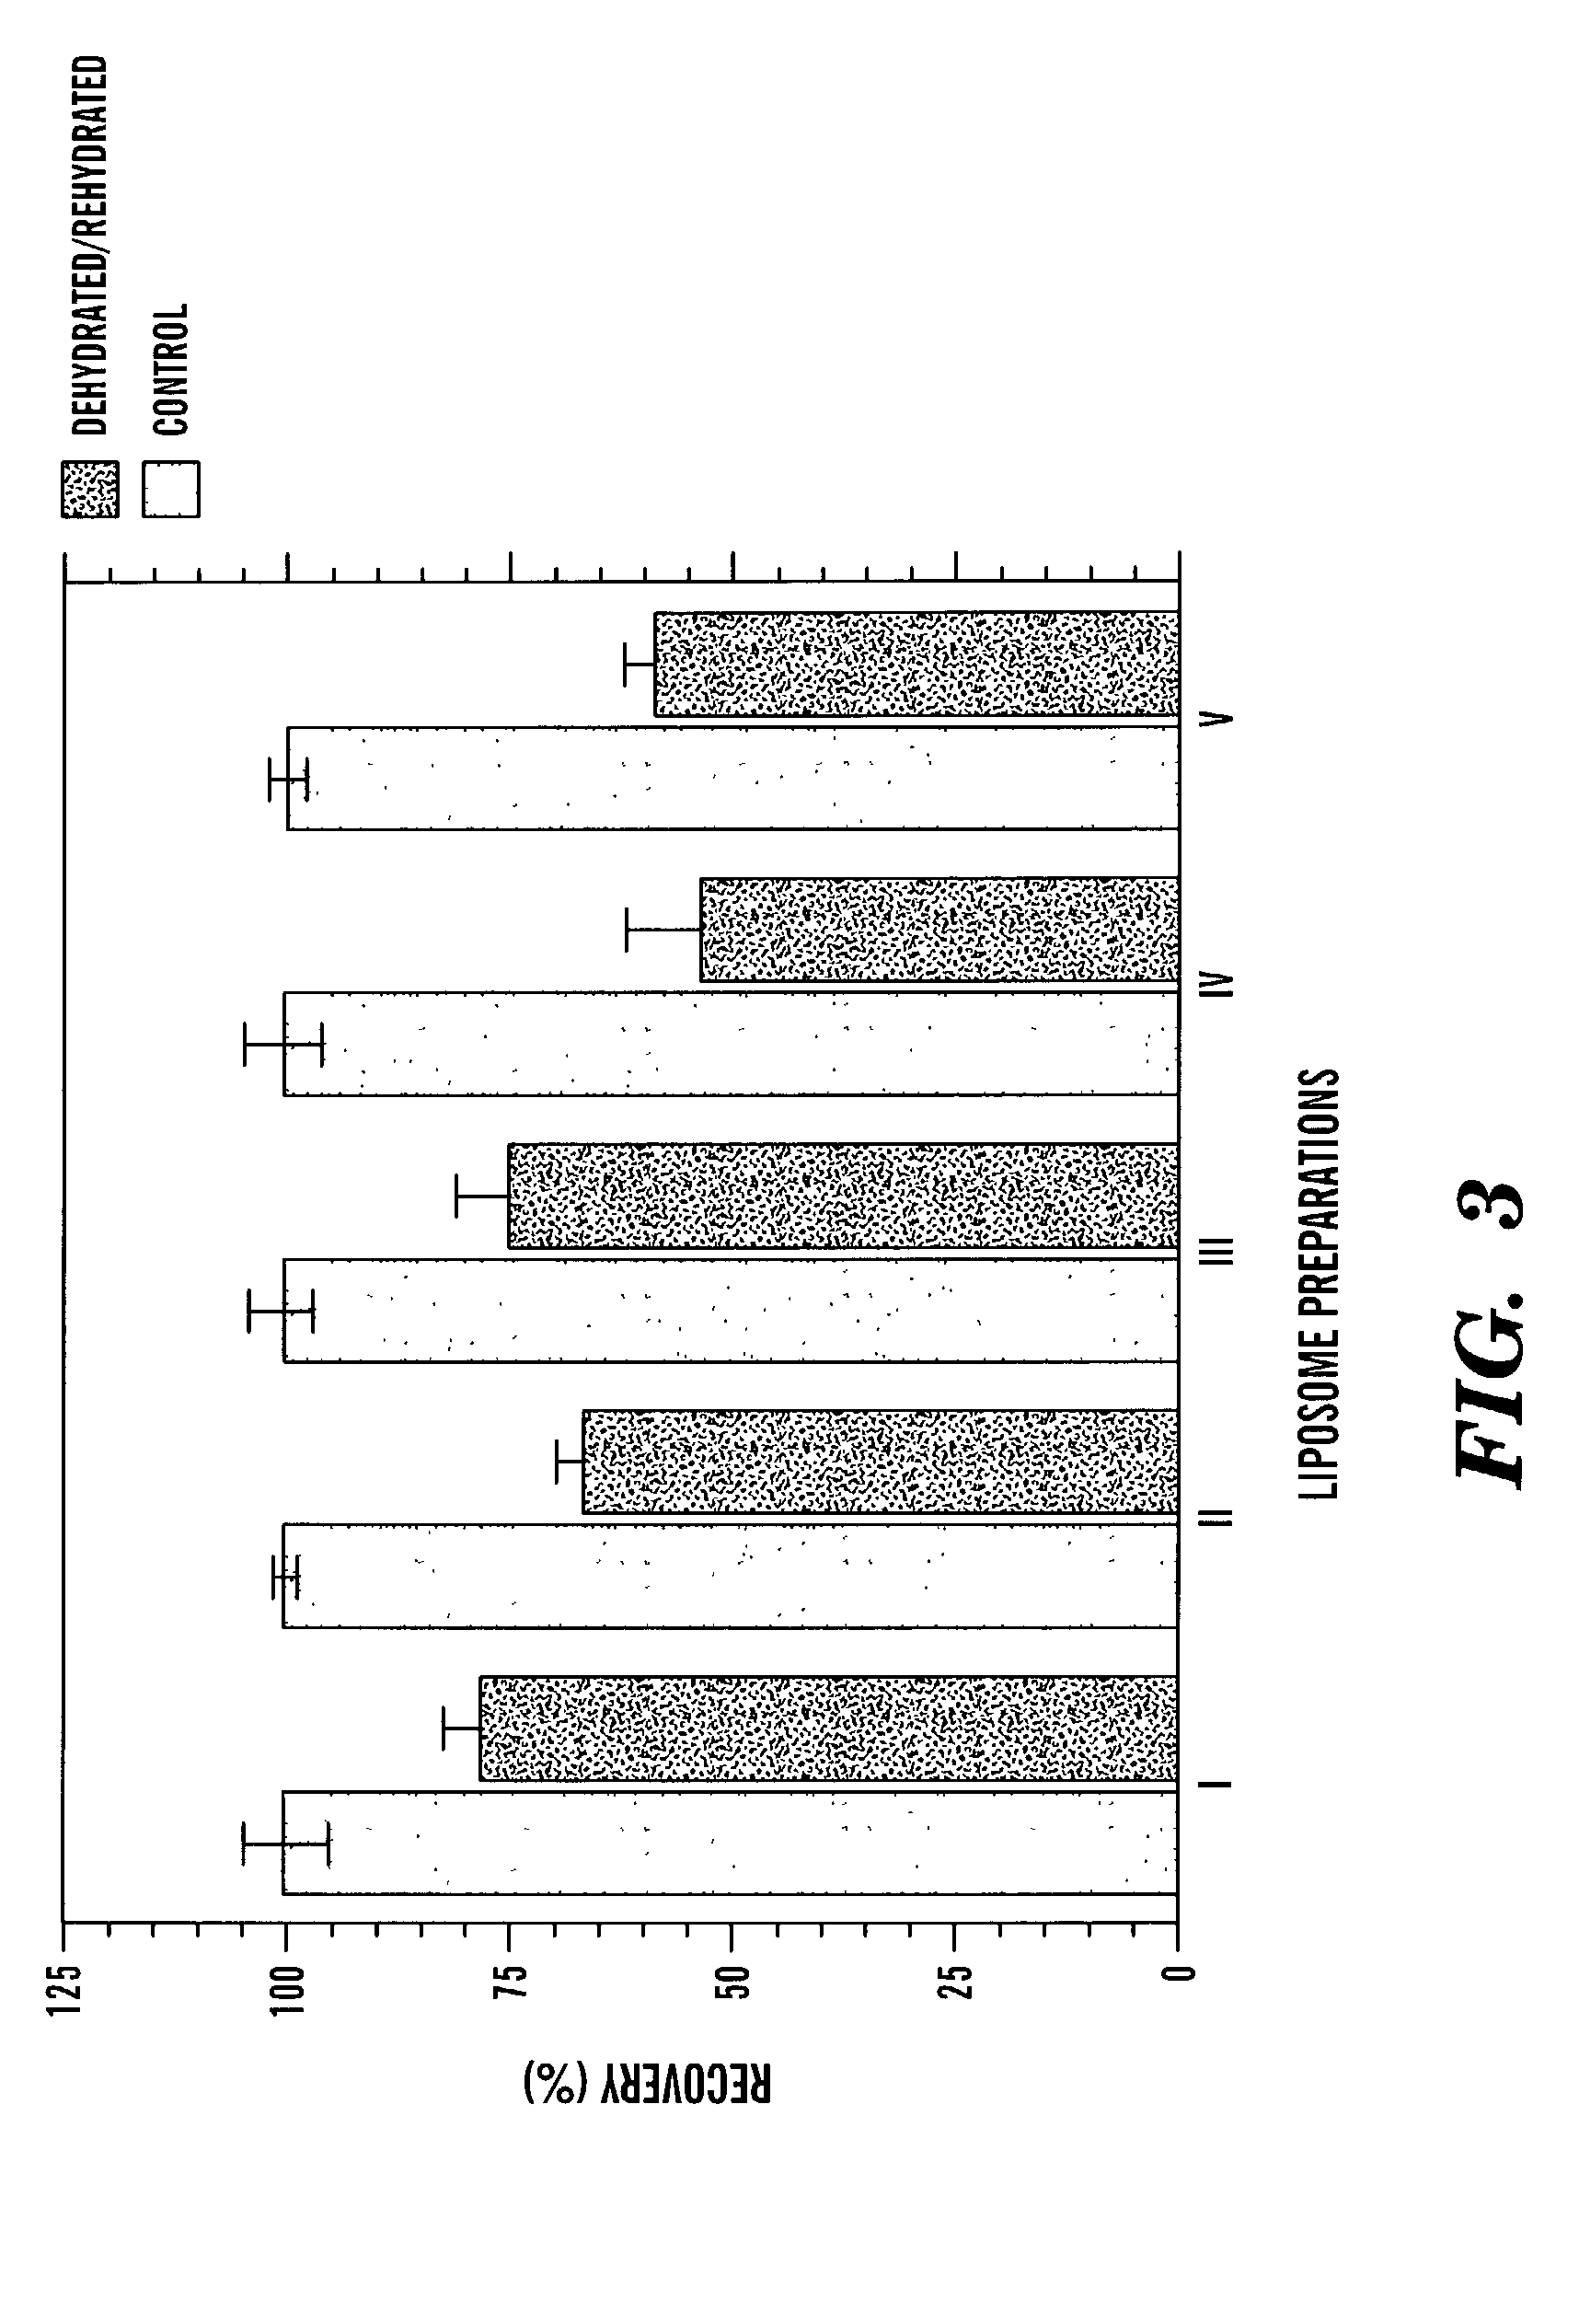 Method of making a test device